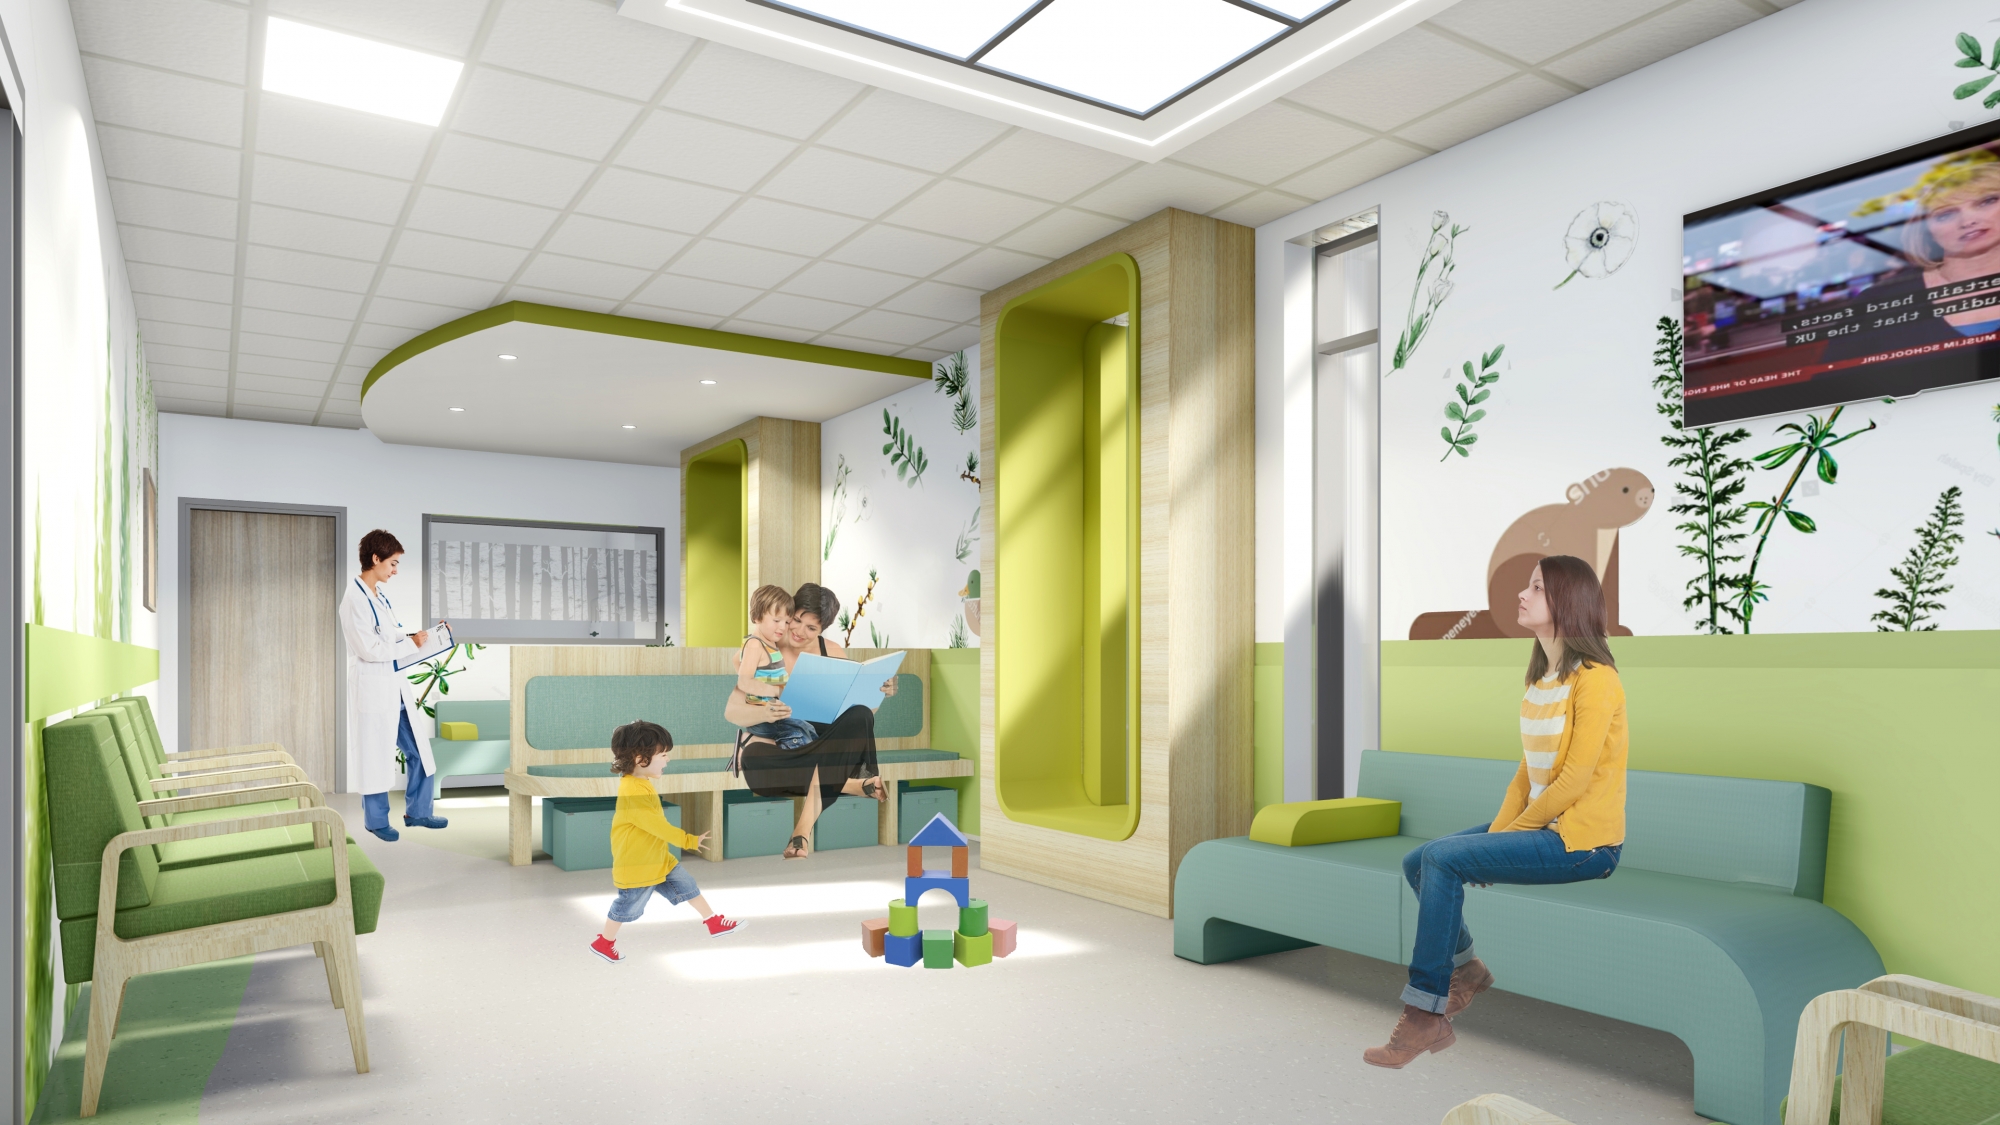 A visual representation of what the new children's waiting area will look like with images on walls, green seating and skylights